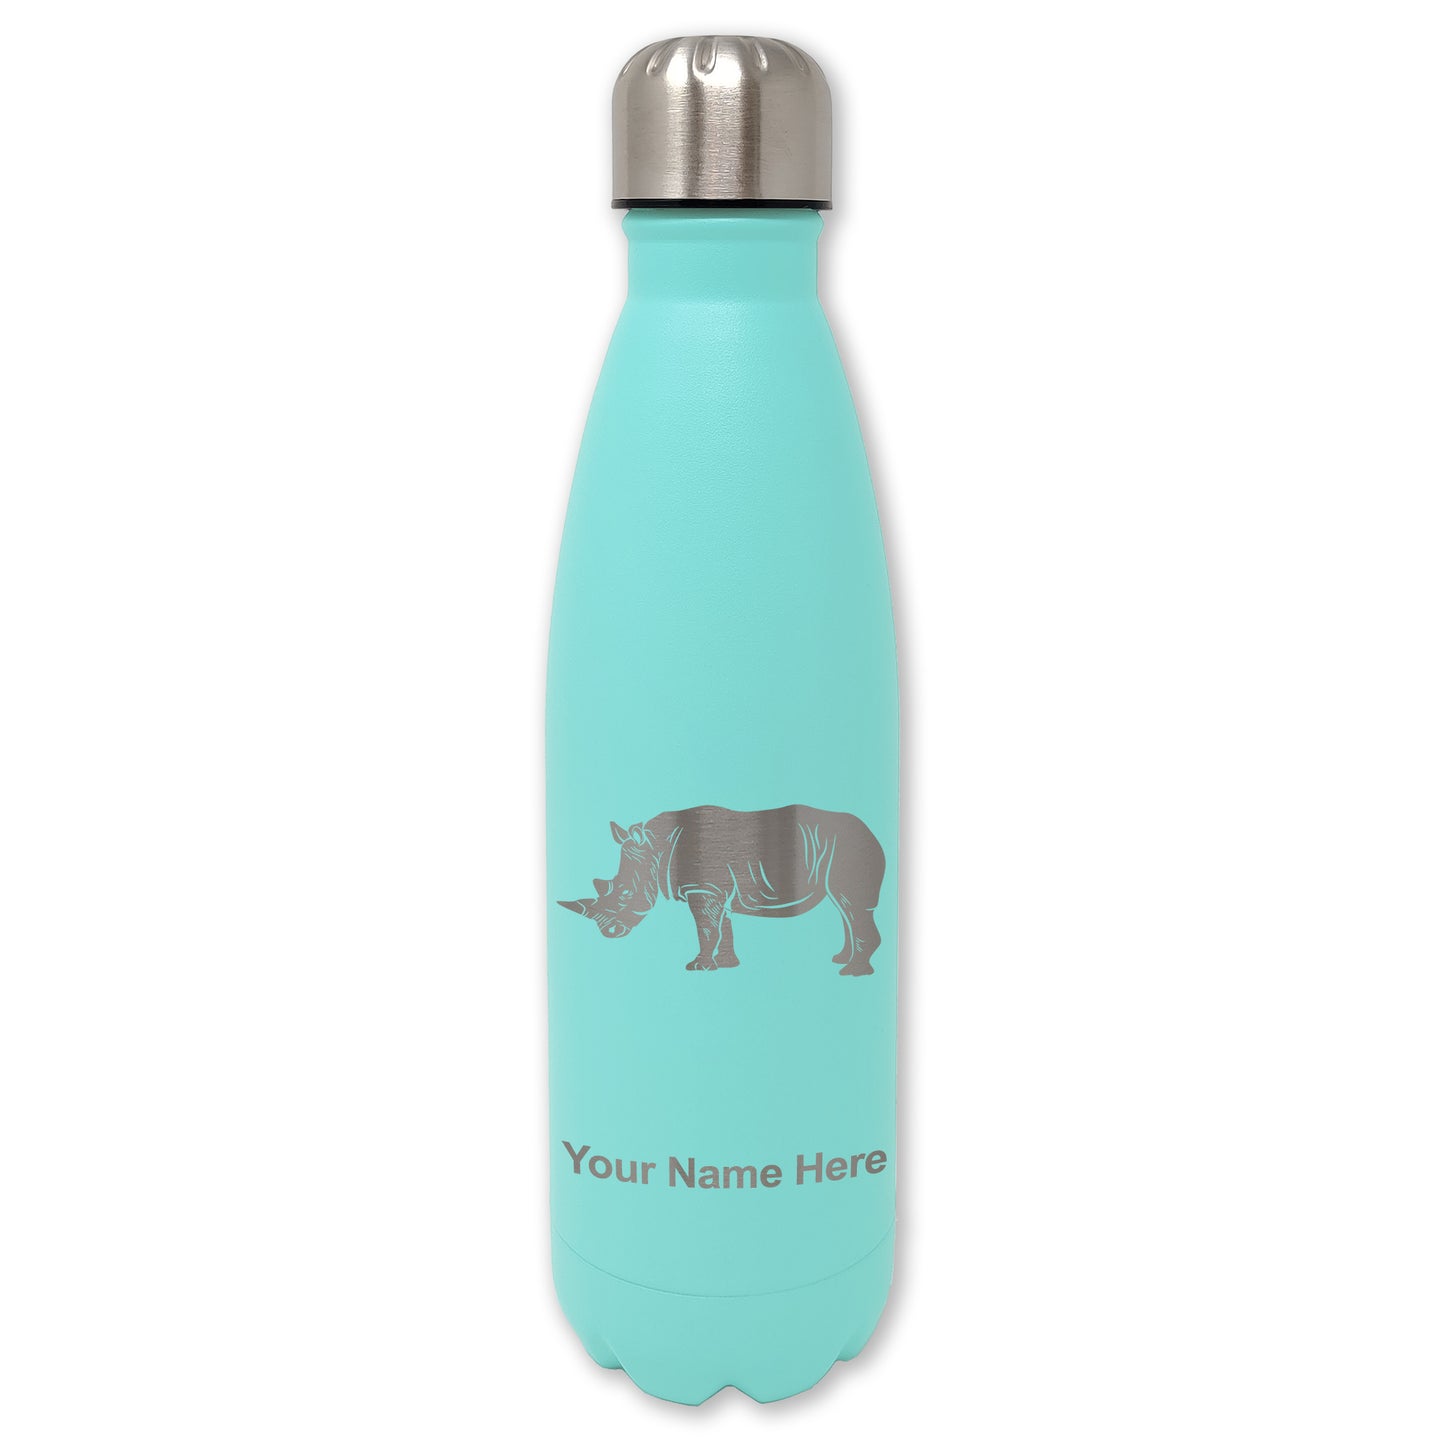 LaserGram Double Wall Water Bottle, Rhinoceros, Personalized Engraving Included